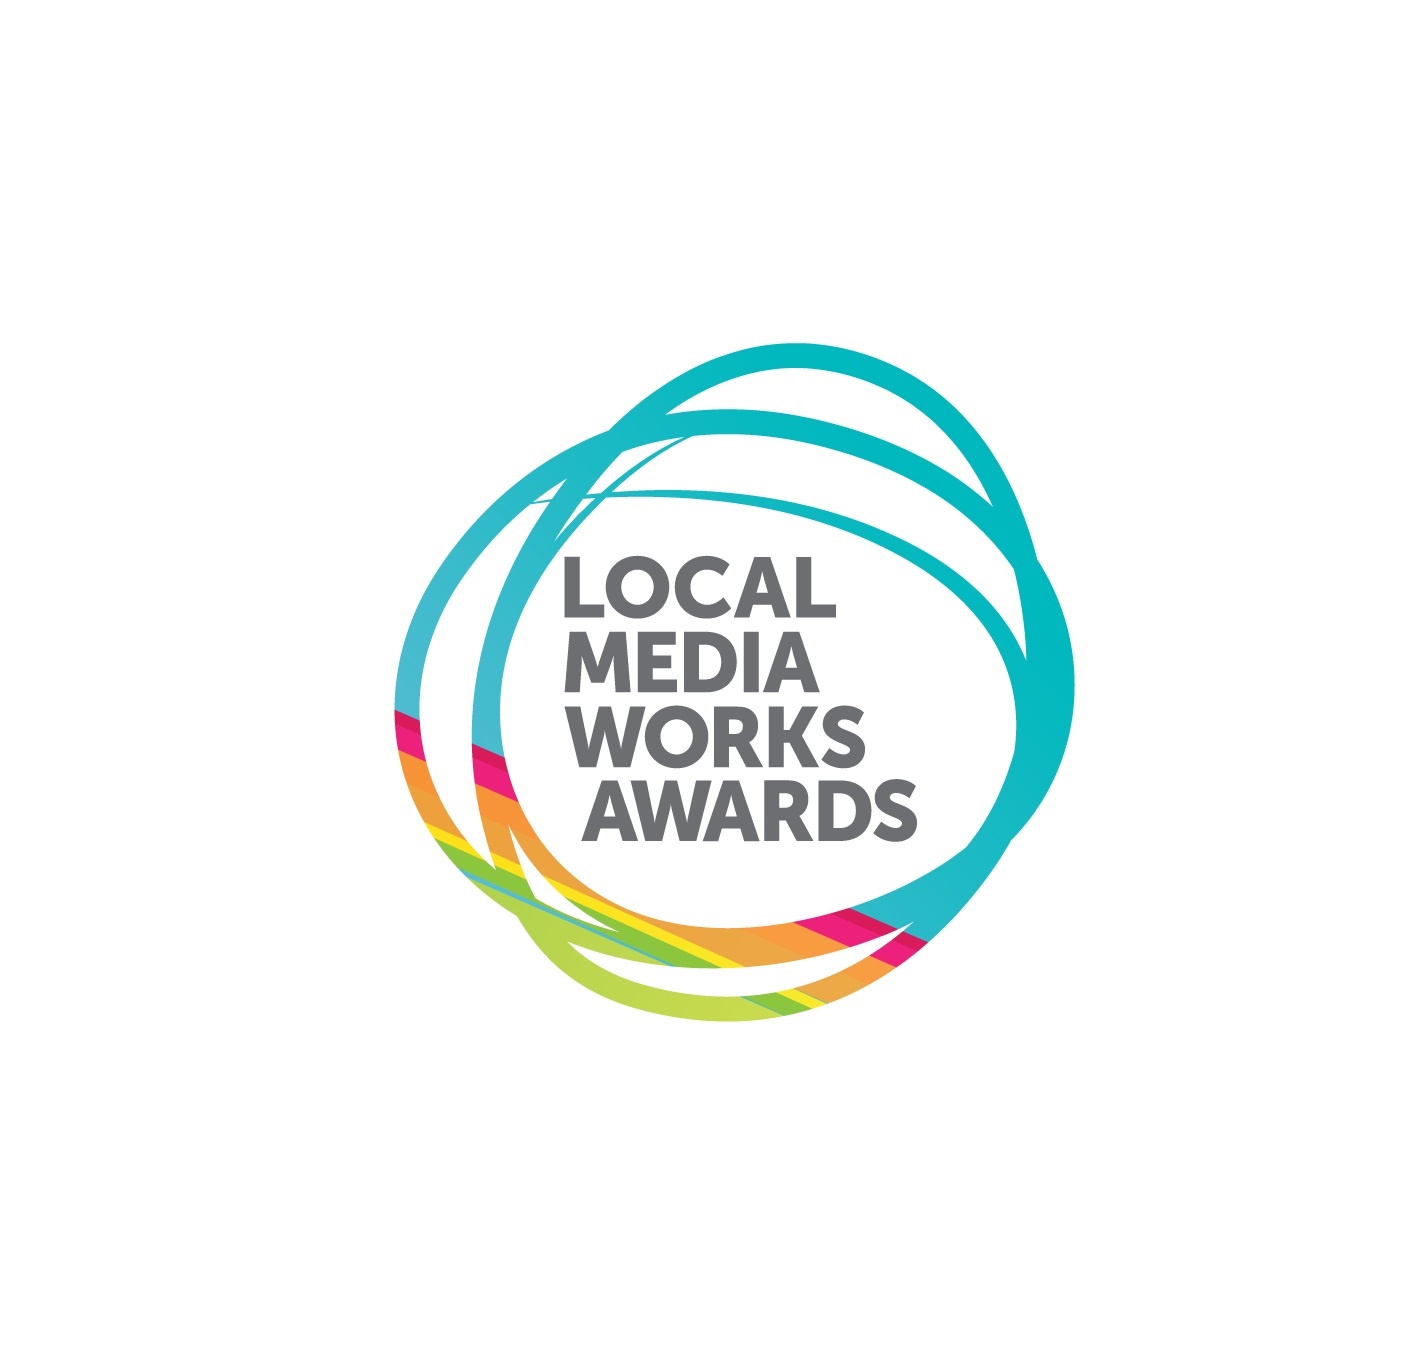 Pete Markey Launches Local Media Works Awards 2019